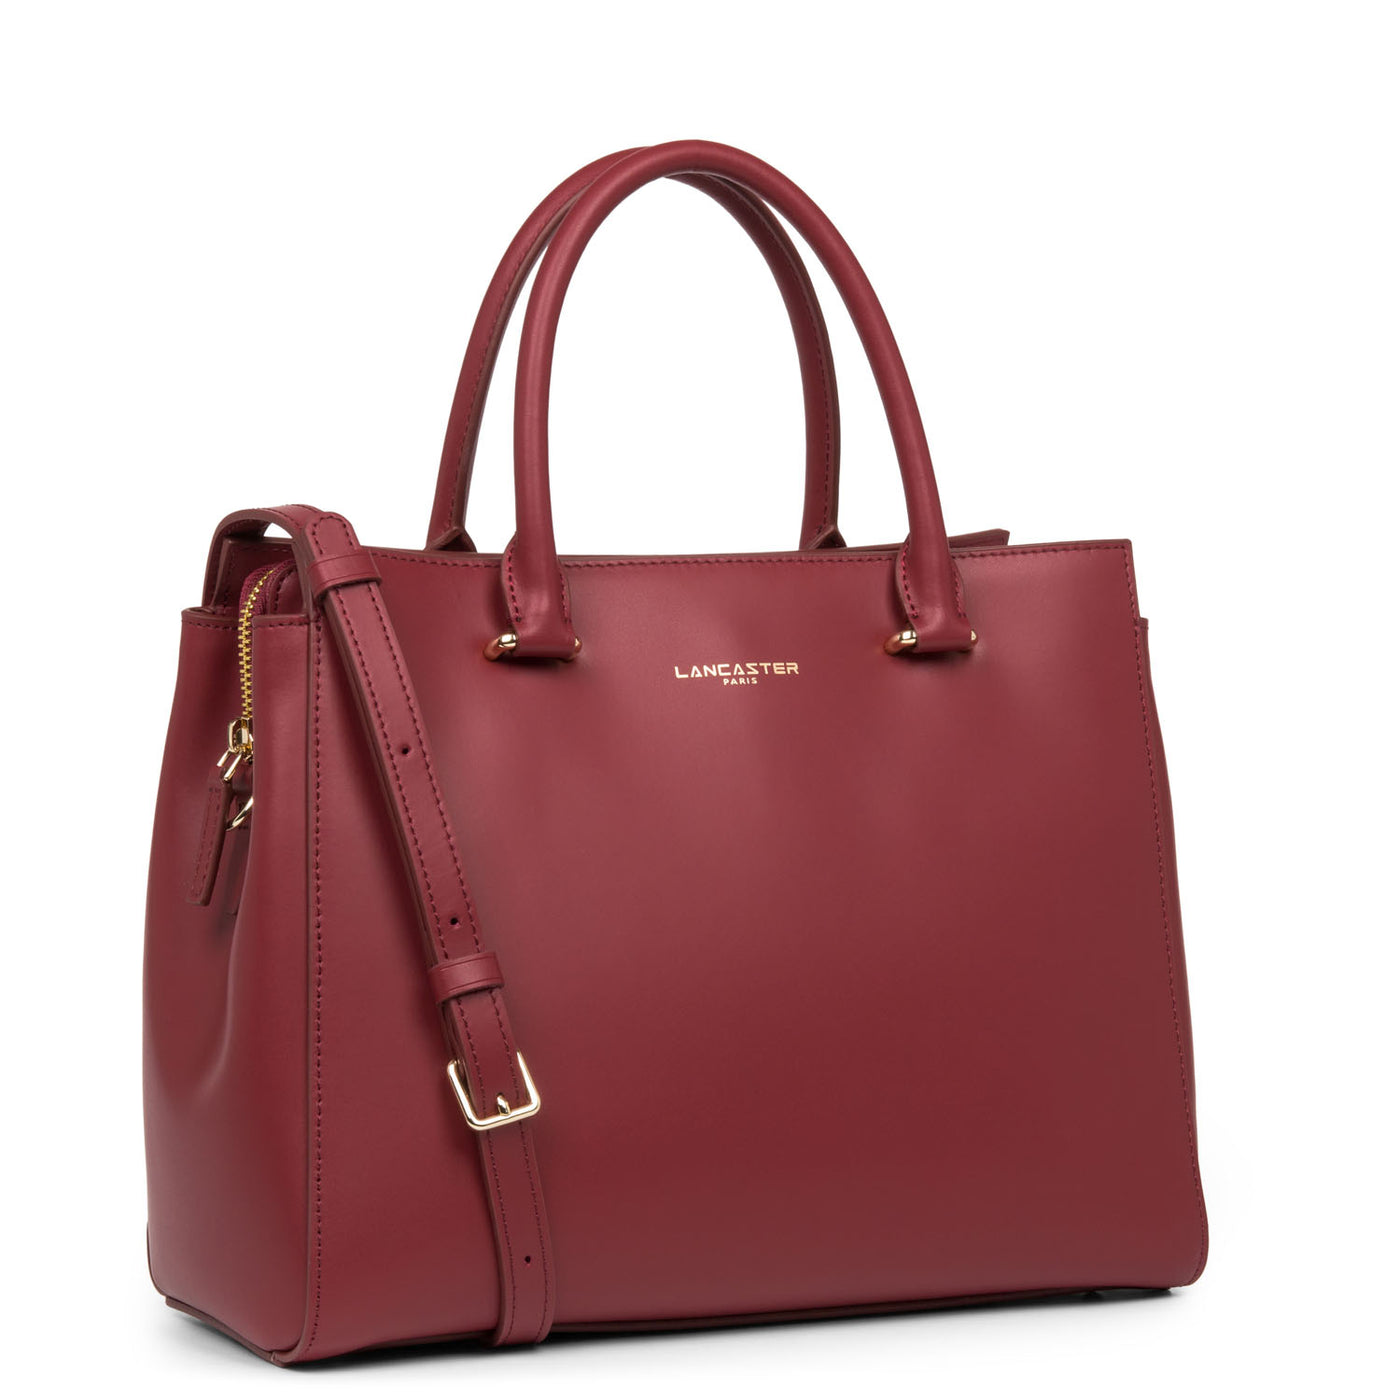 sac à main - smooth or #couleur_betterave